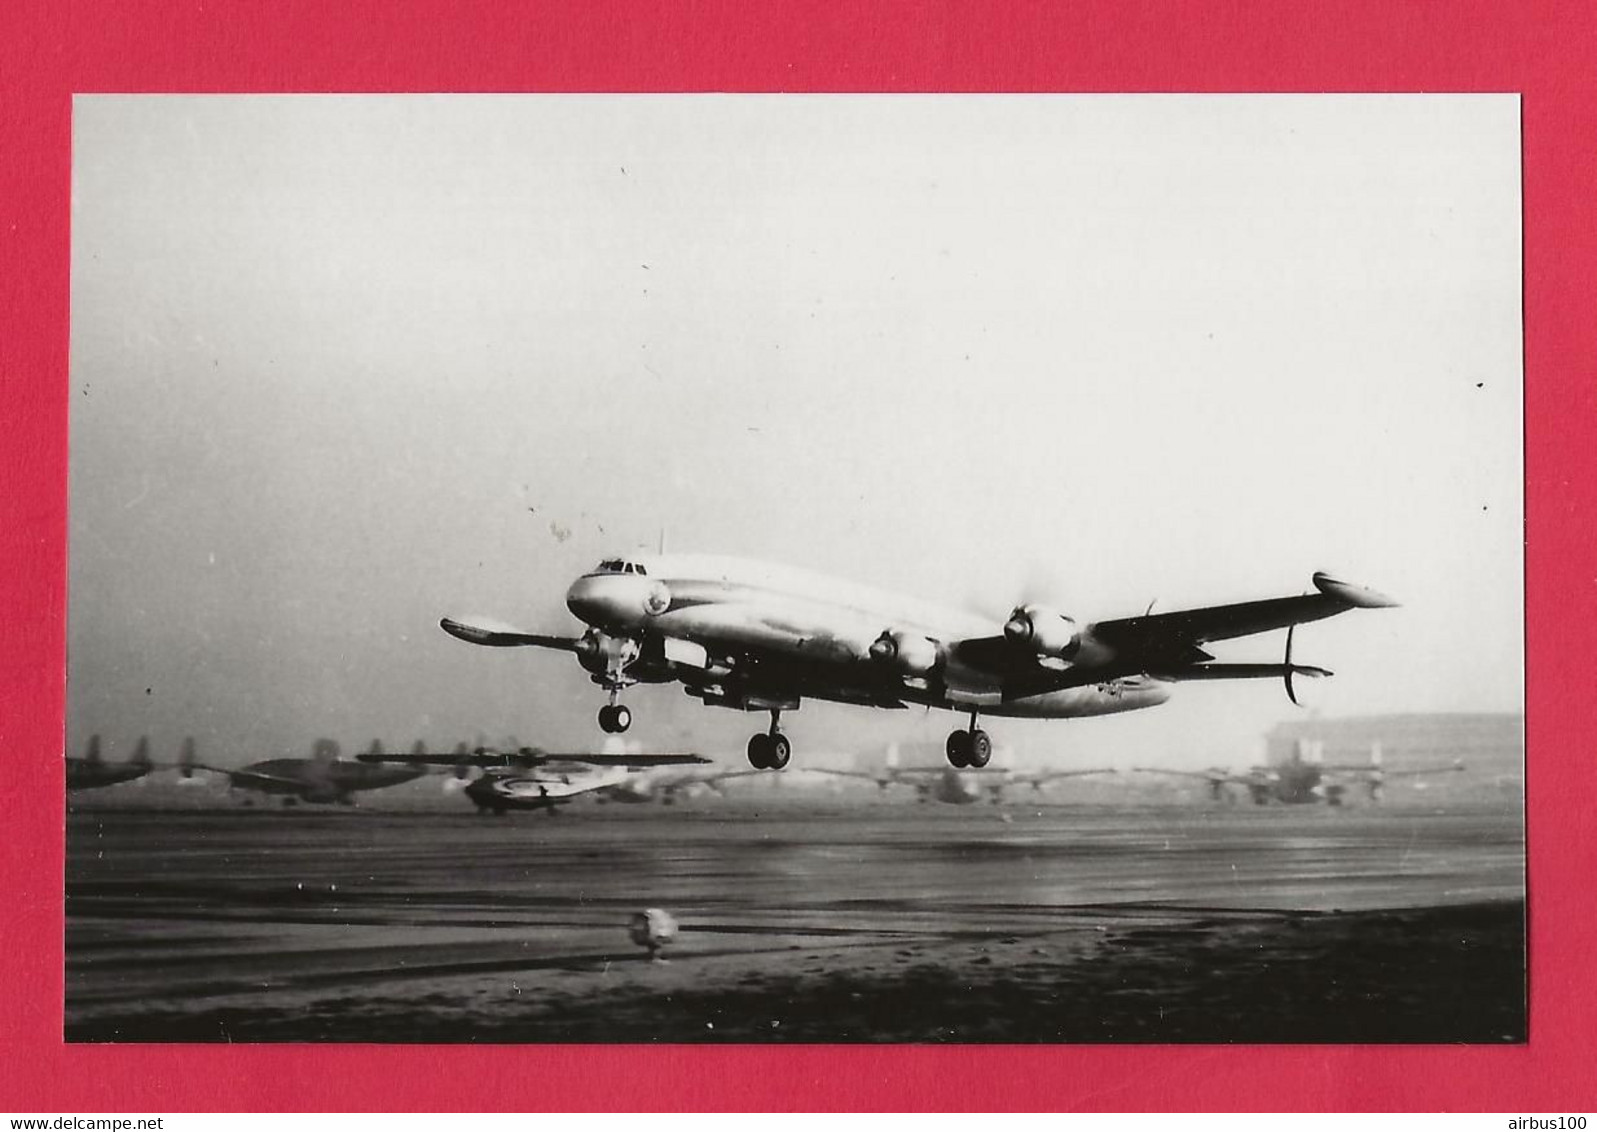 BELLE PHOTO REPRODUCTION AVION PLANE - COMPAGNIE LOCKHEED CONSTELLATION A L'ATTERRISSAGE - Aviación